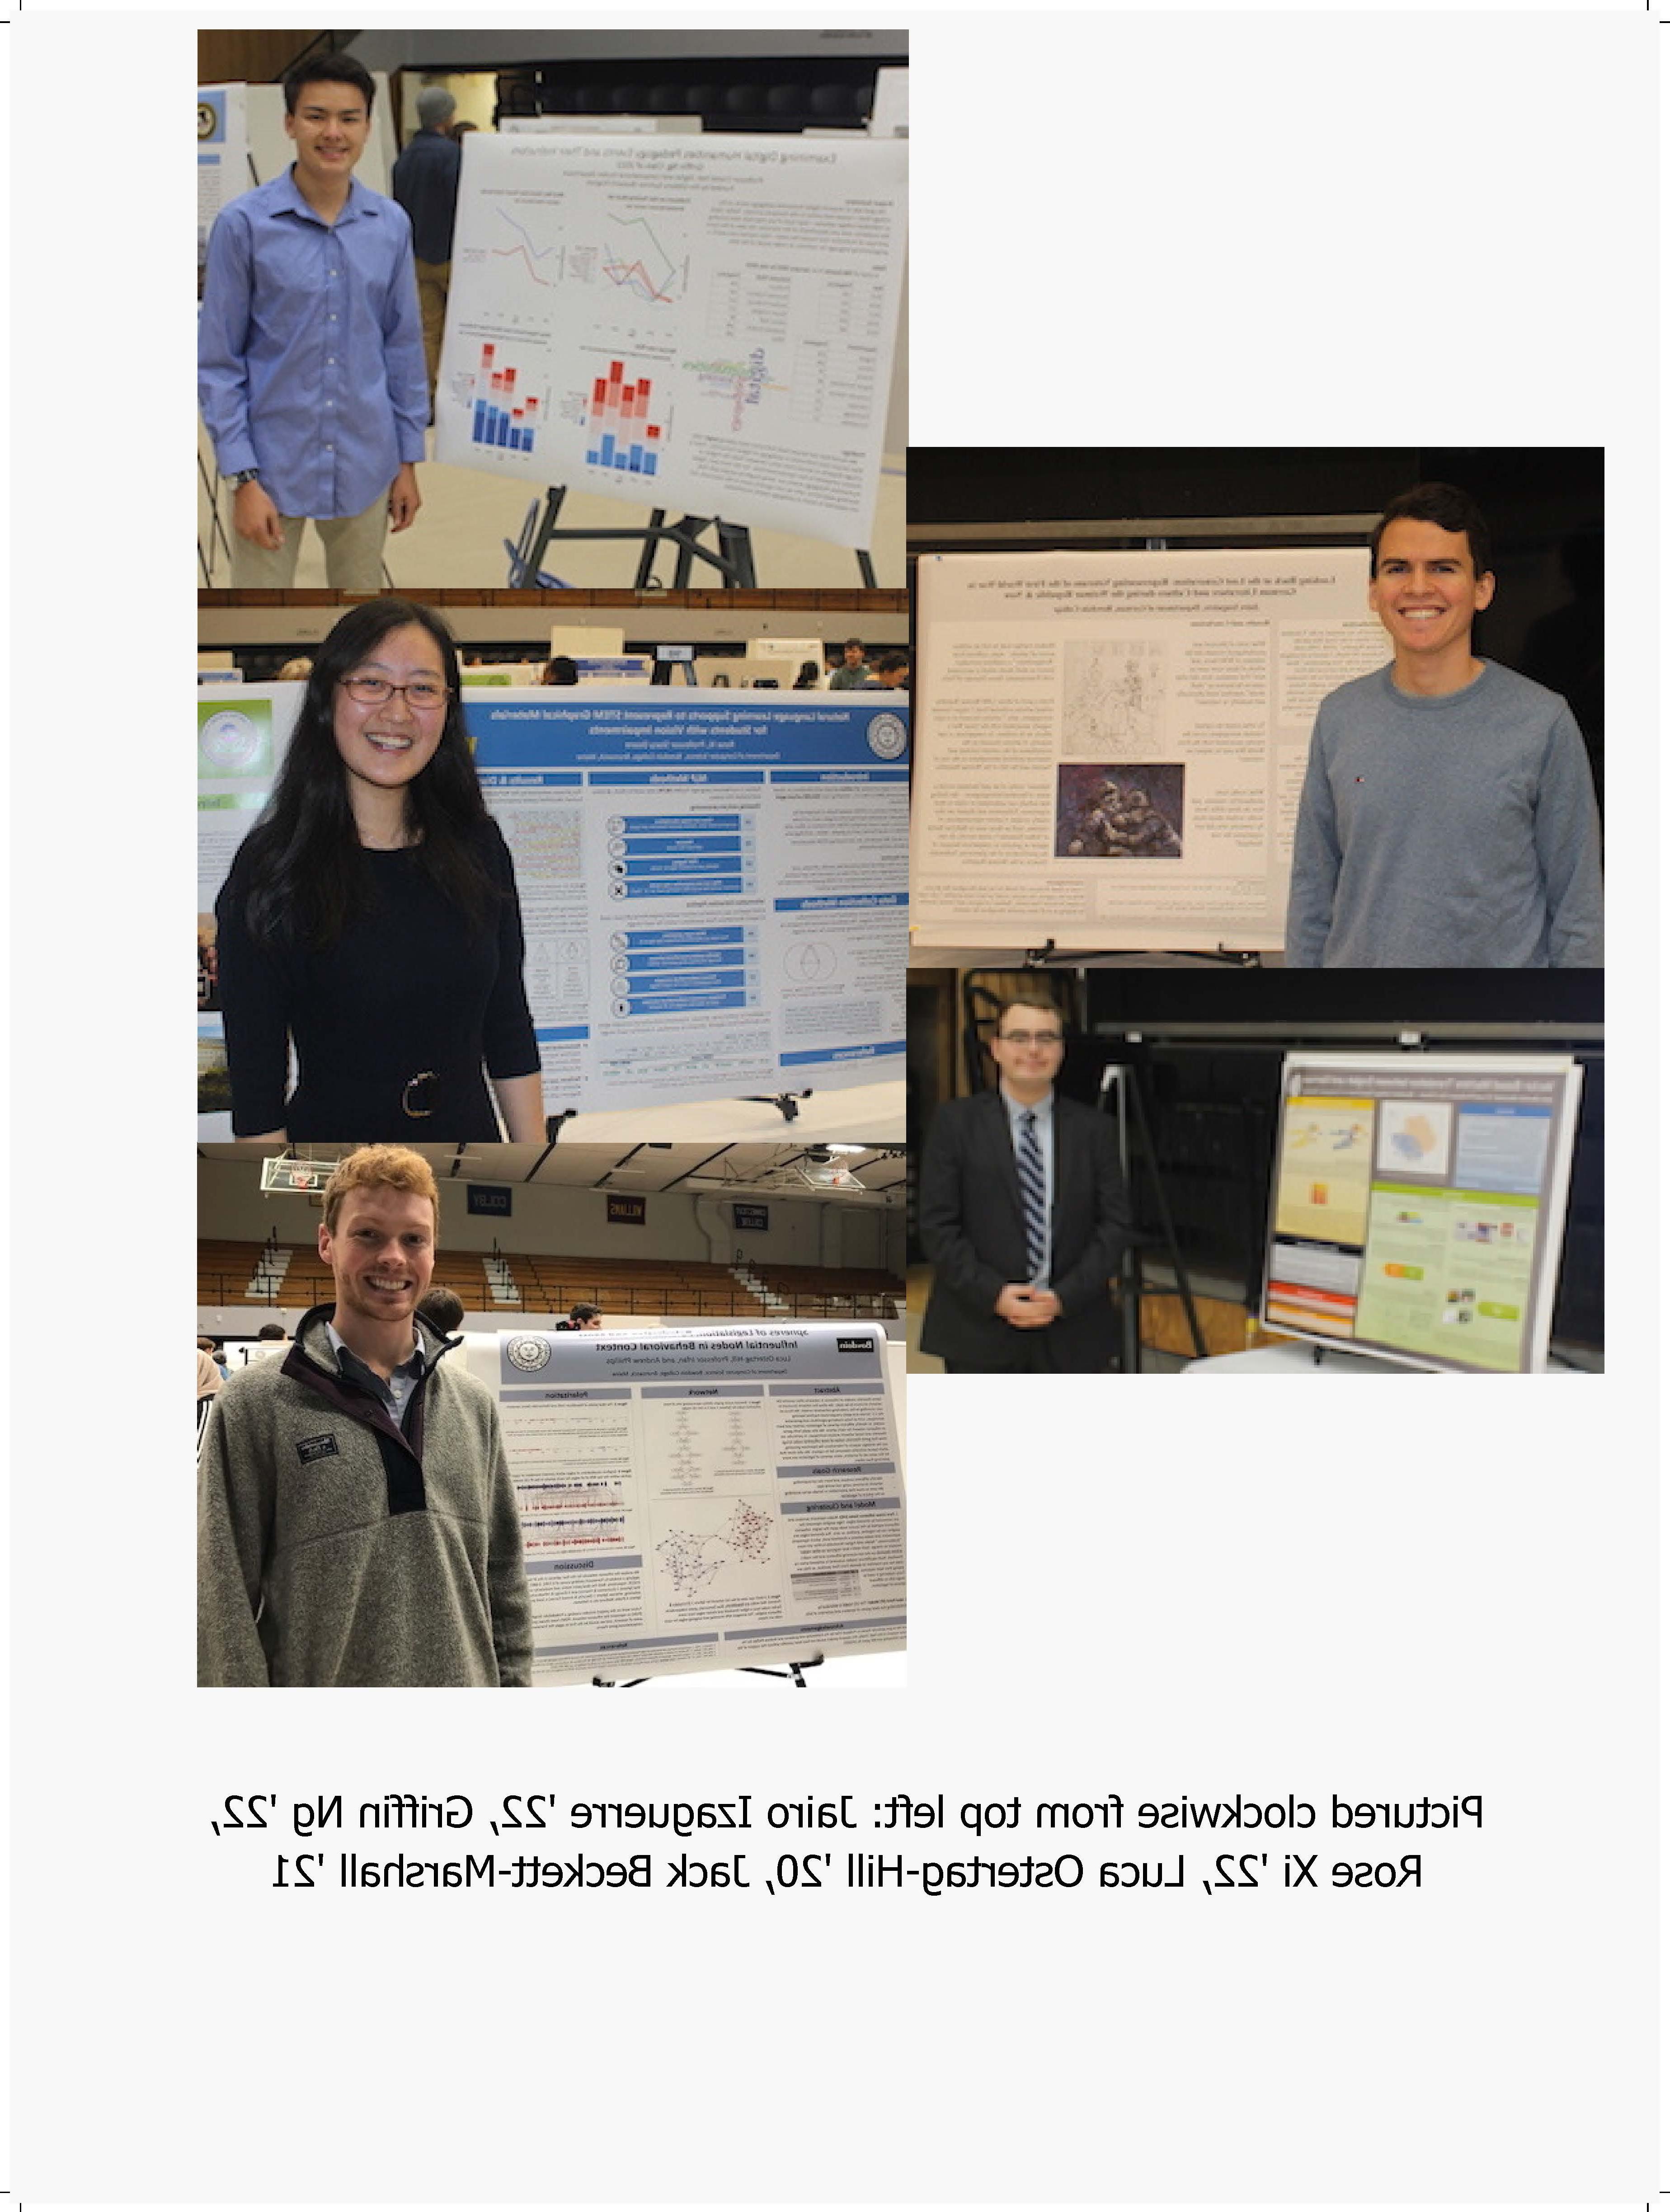 Students are pictured who participated in the 2019 President's Symposium with projects that contributed specifically to the mission of the DCS department. Pictured clockwise from top left: Jairo Izaguerre '22, Griffin Ng '22, Rose Xi '22, Luca Ostertag-Hill '20, Jack Beckett-Marshall '21 